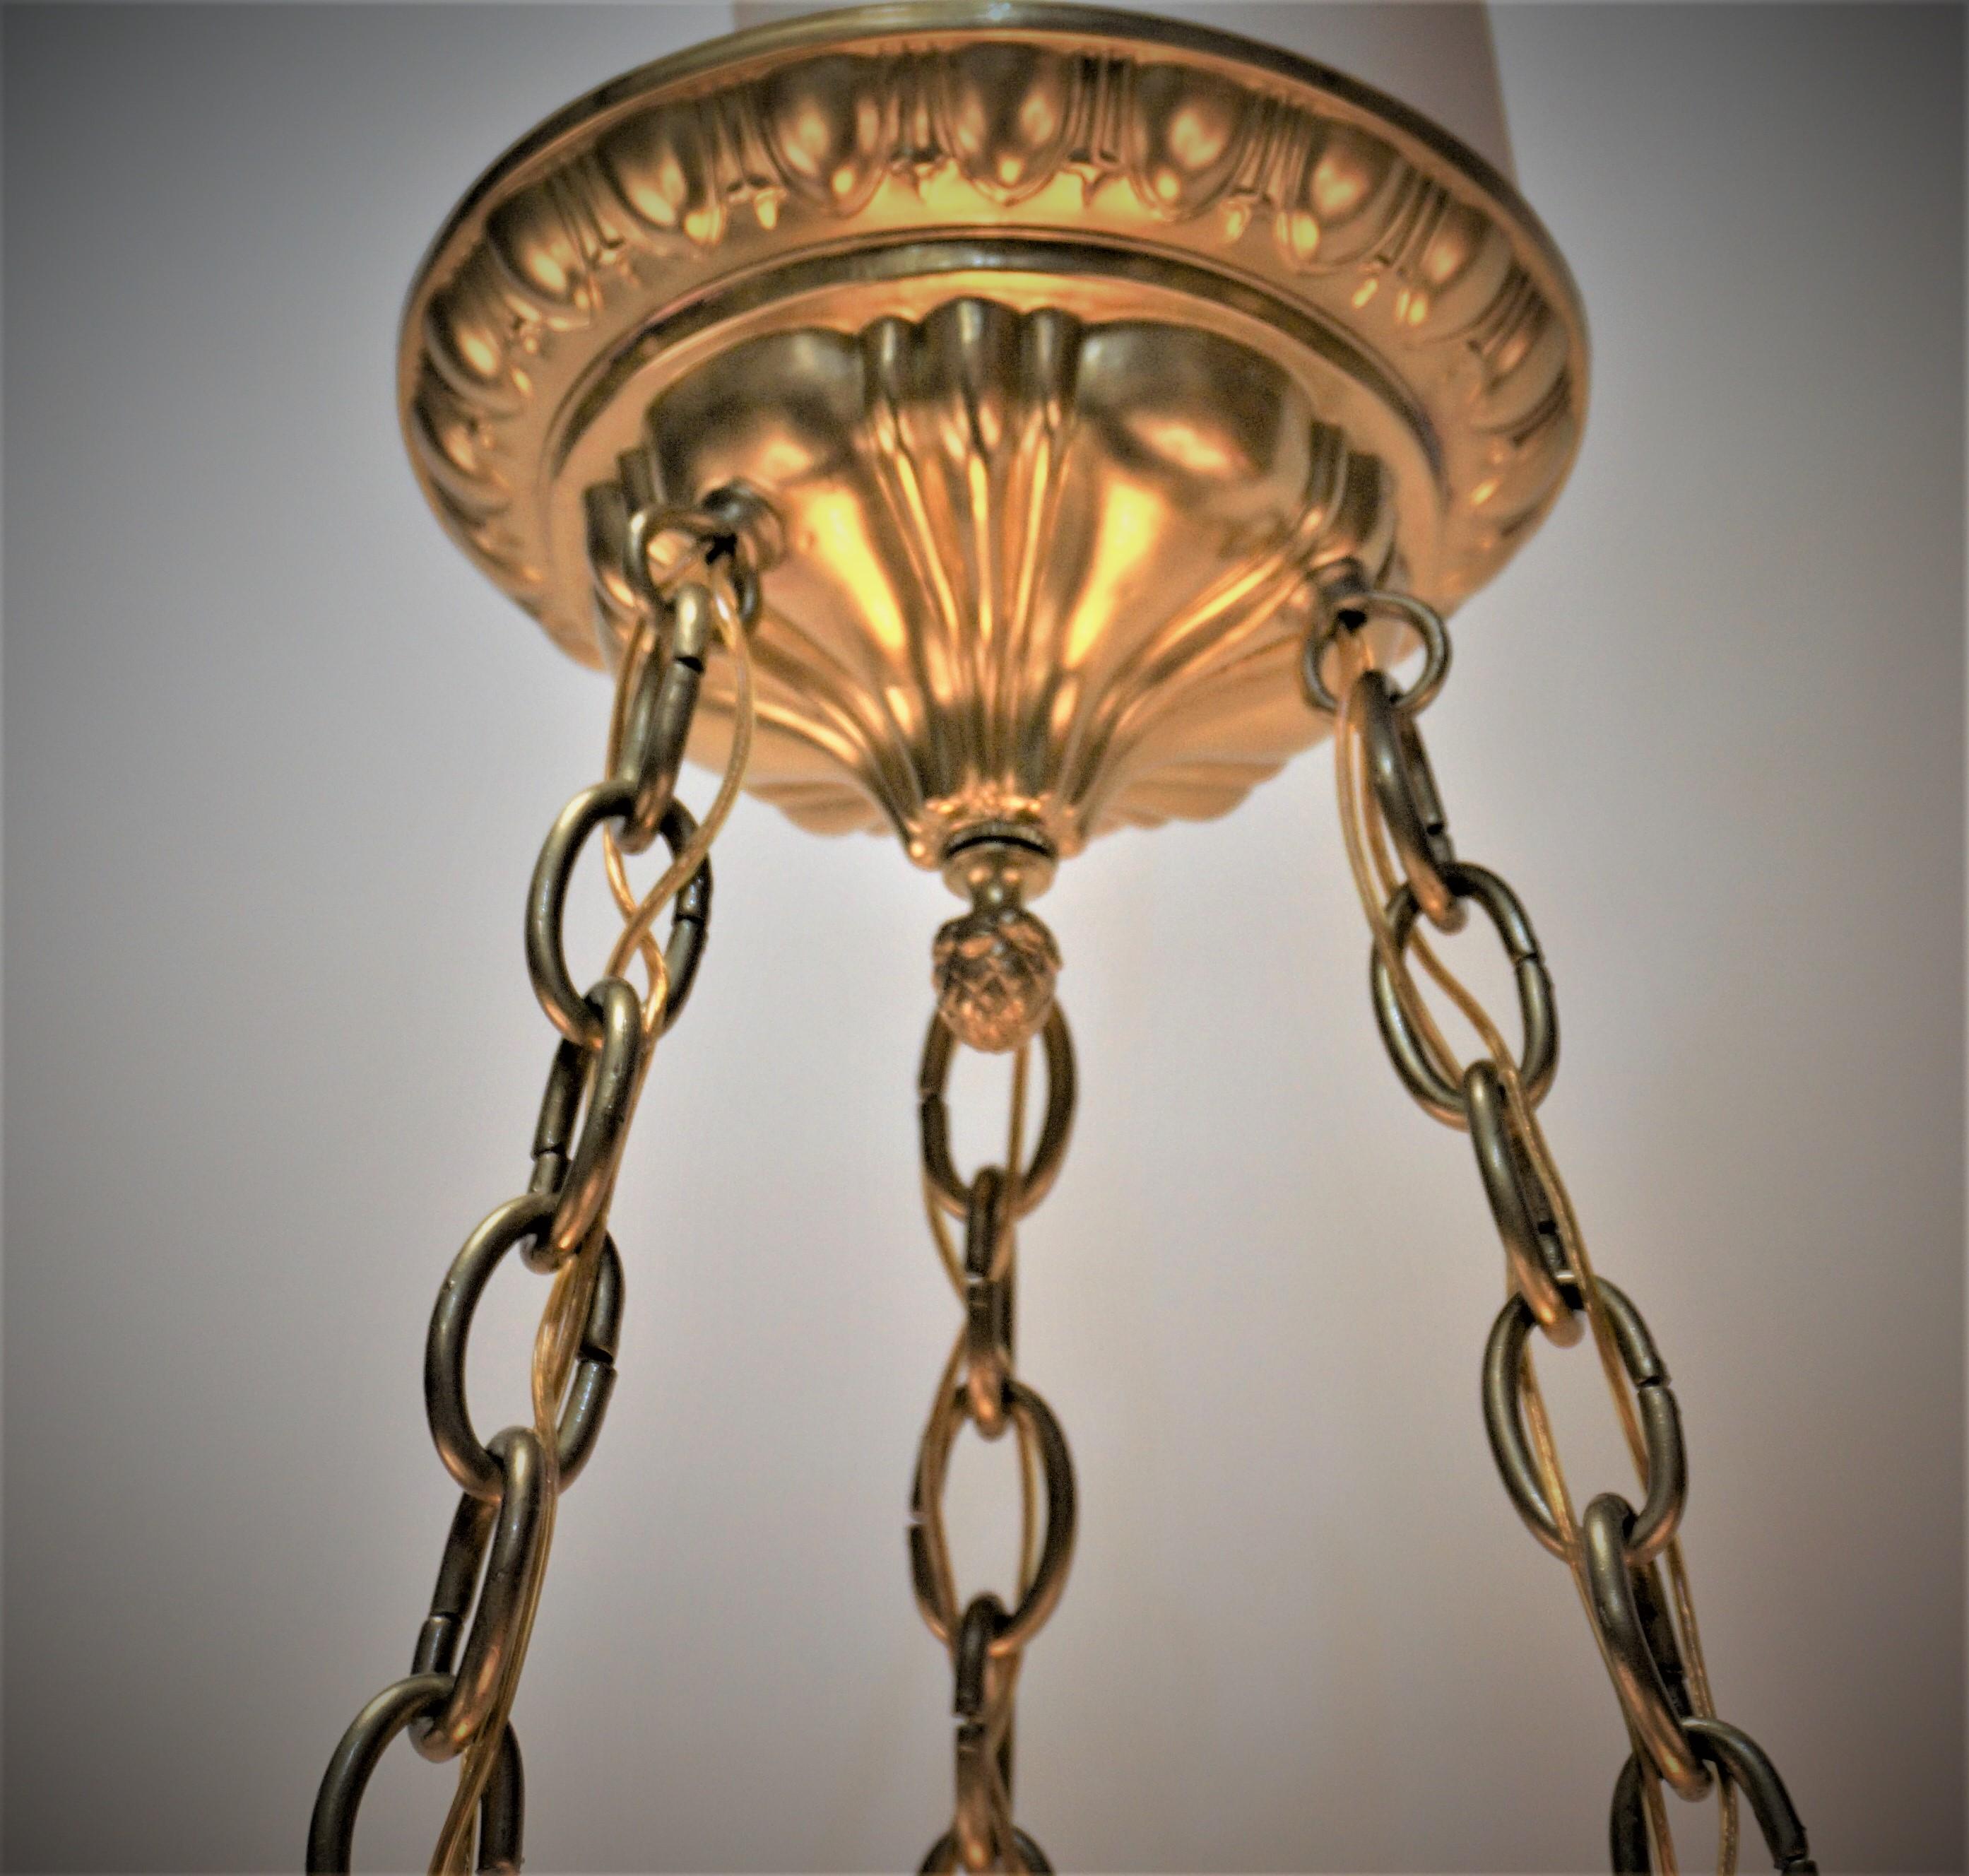 Early 20th Century American Neoclassical Style Glass and Brass Chandelier #3 For Sale